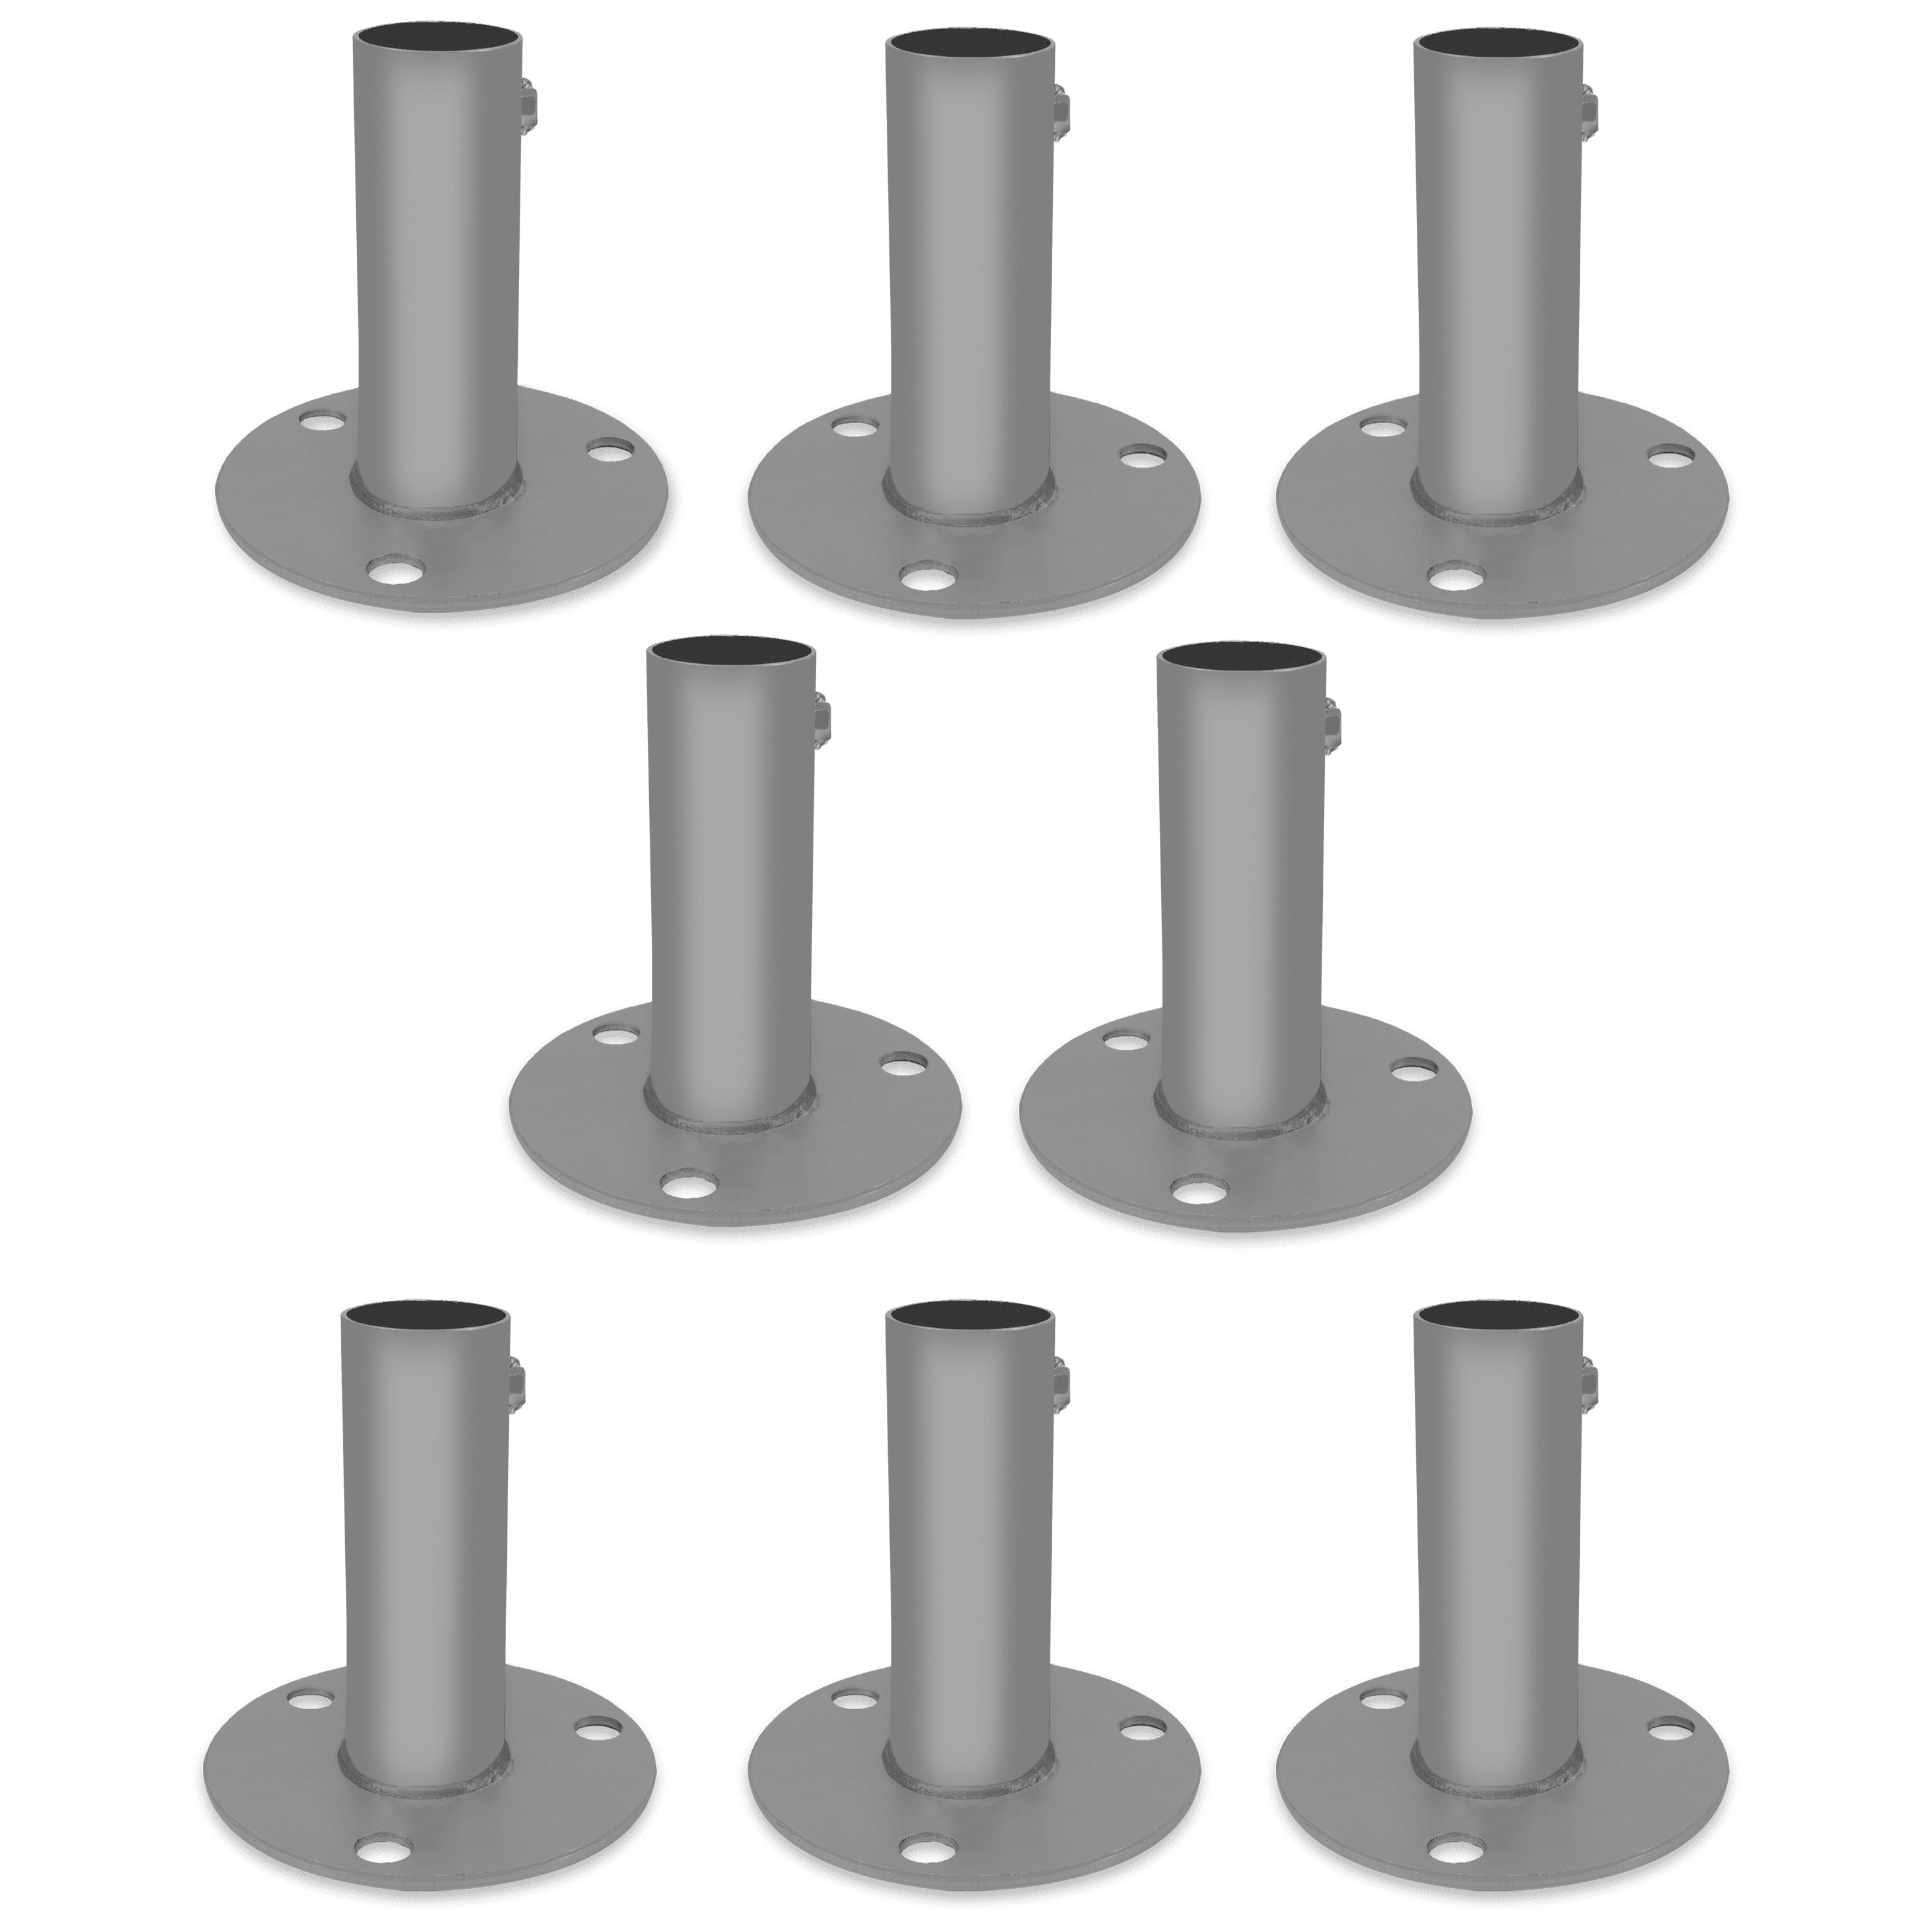 FFCBW Canopy Fittings 4 Heavy duty 2 Way Connector fittings for 1 Inch EMT 